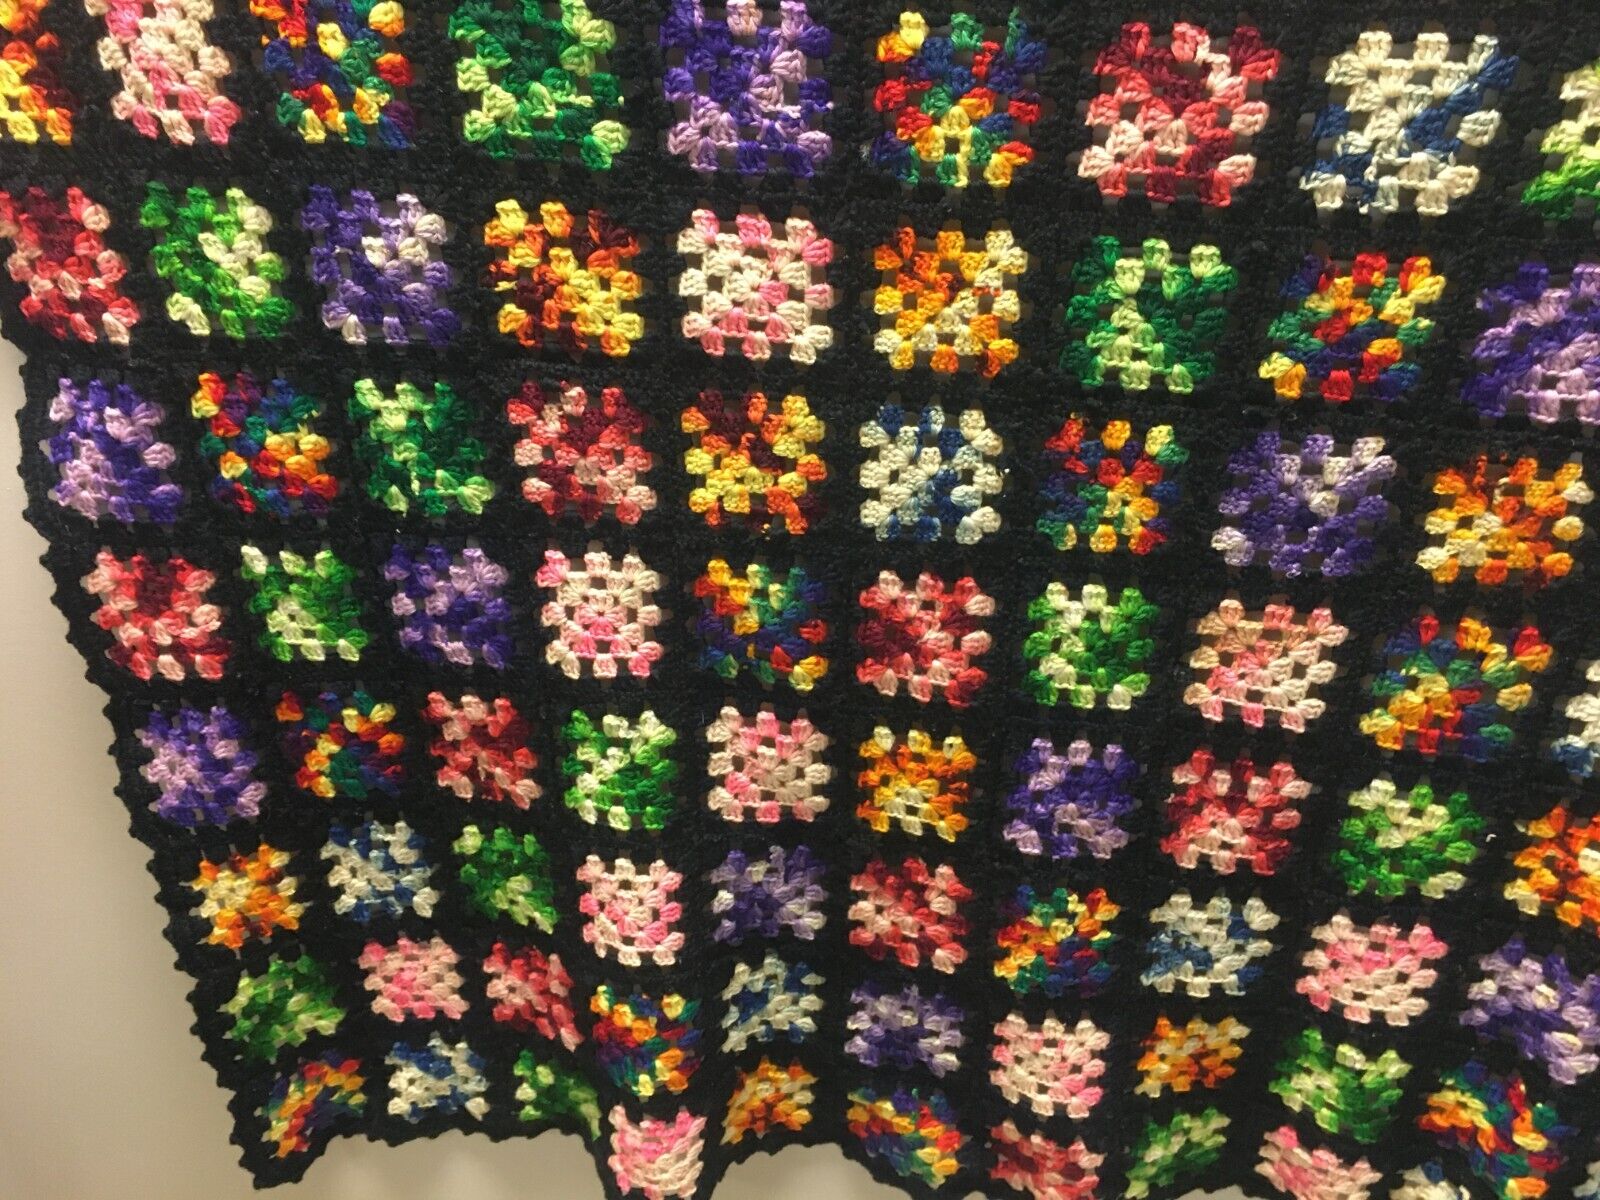 Crochet Afghan Granny Square Blanket Throw 48" X 56" Black Multicolor COLORFUL